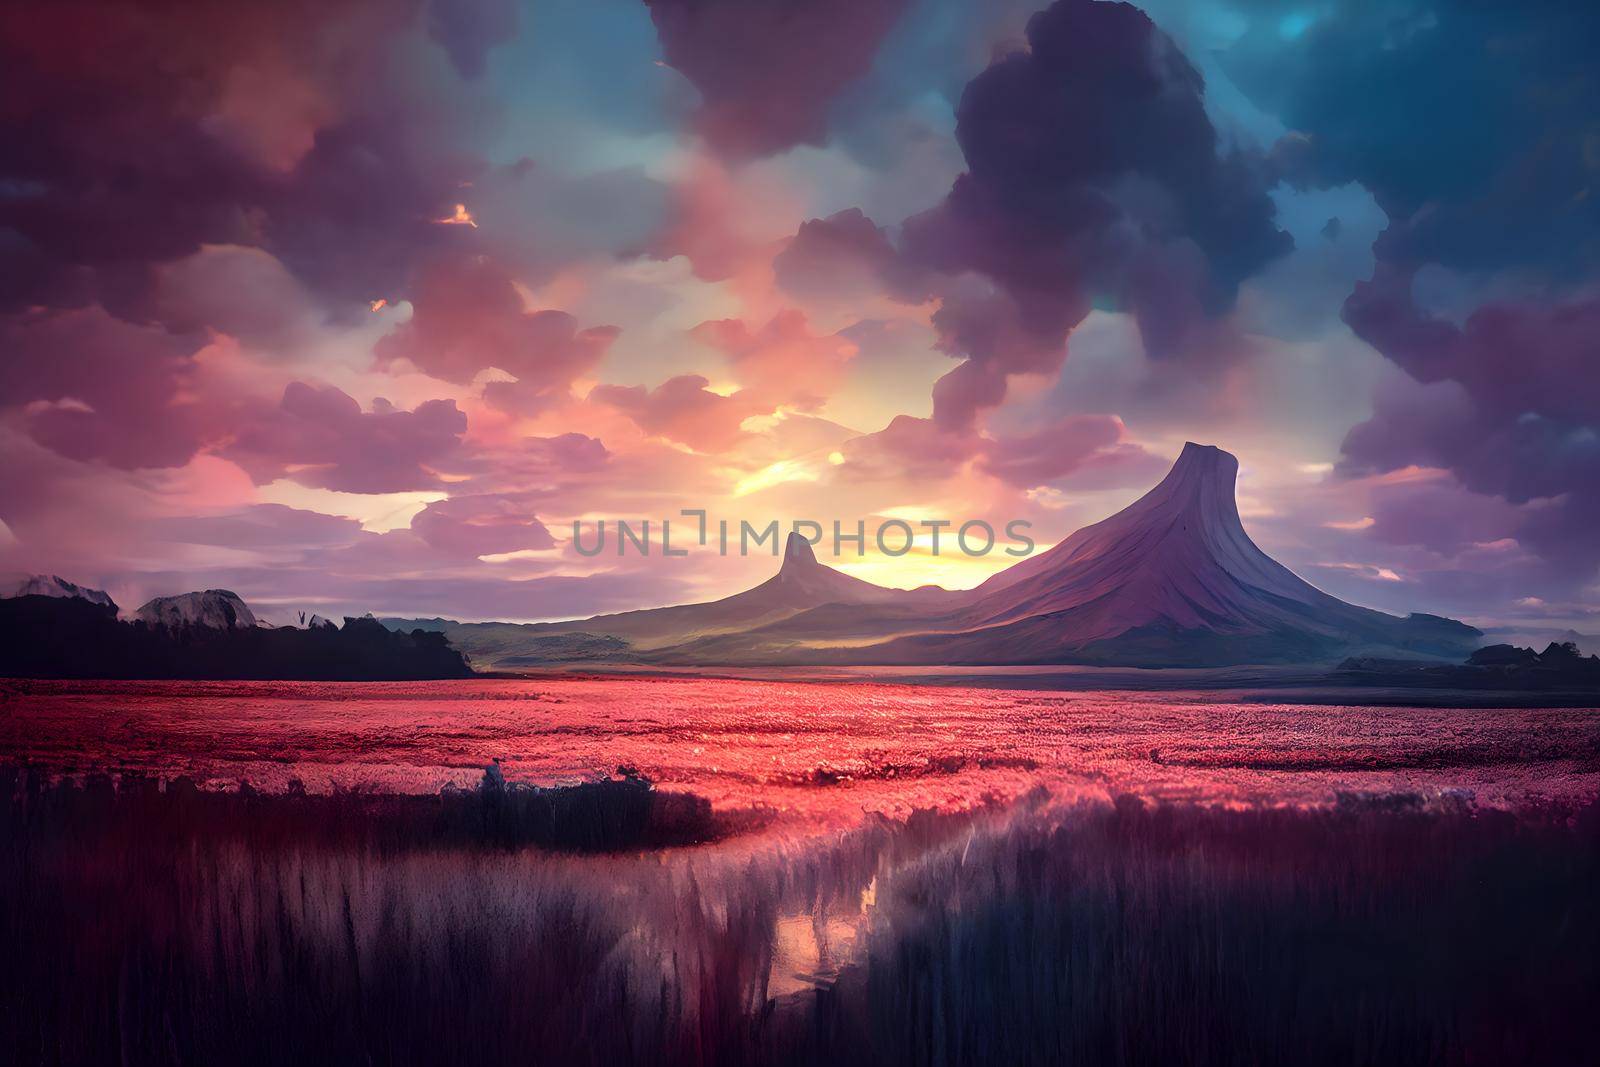 dreamy anime style summer wilderness landscape with mesa mountains, neural network generated art. Digitally generated image. Not based on any actual scene or pattern.